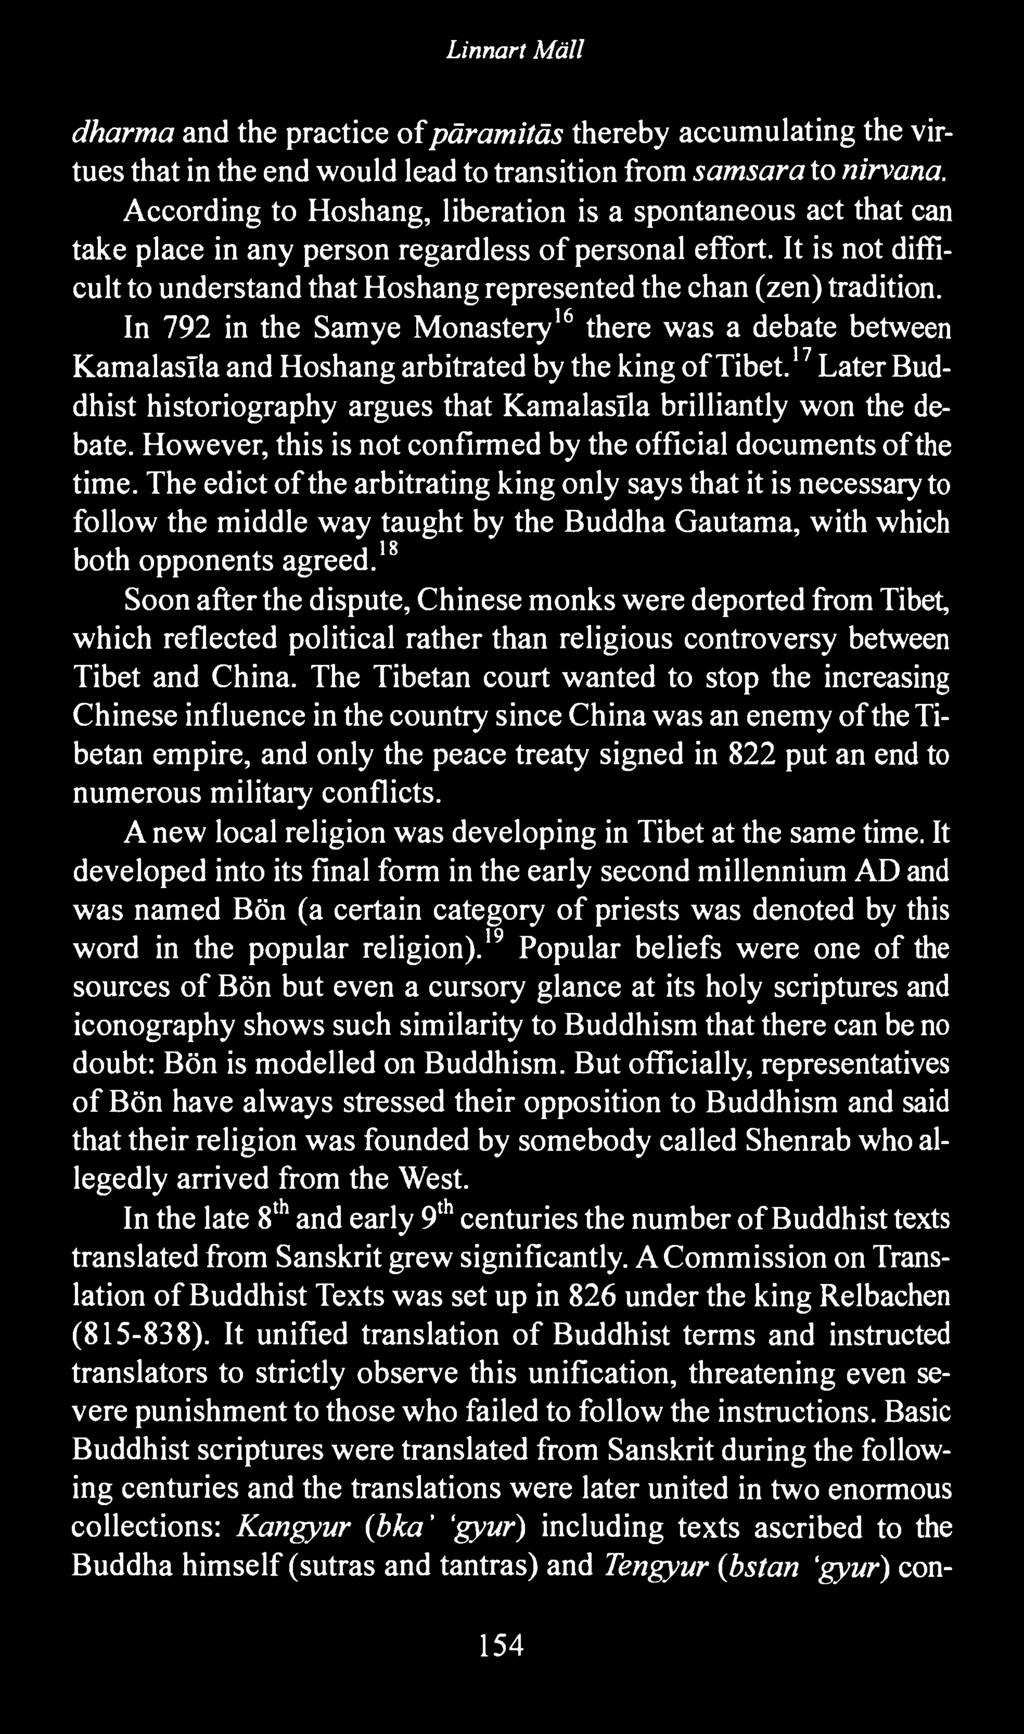 It is not difficult to understand that Hoshang represented the chan (zen) tradition. In 792 in the Samye Monastery 16 there was a debate between Kamalaslla and Hoshang arbitrated by the king of Tibet.